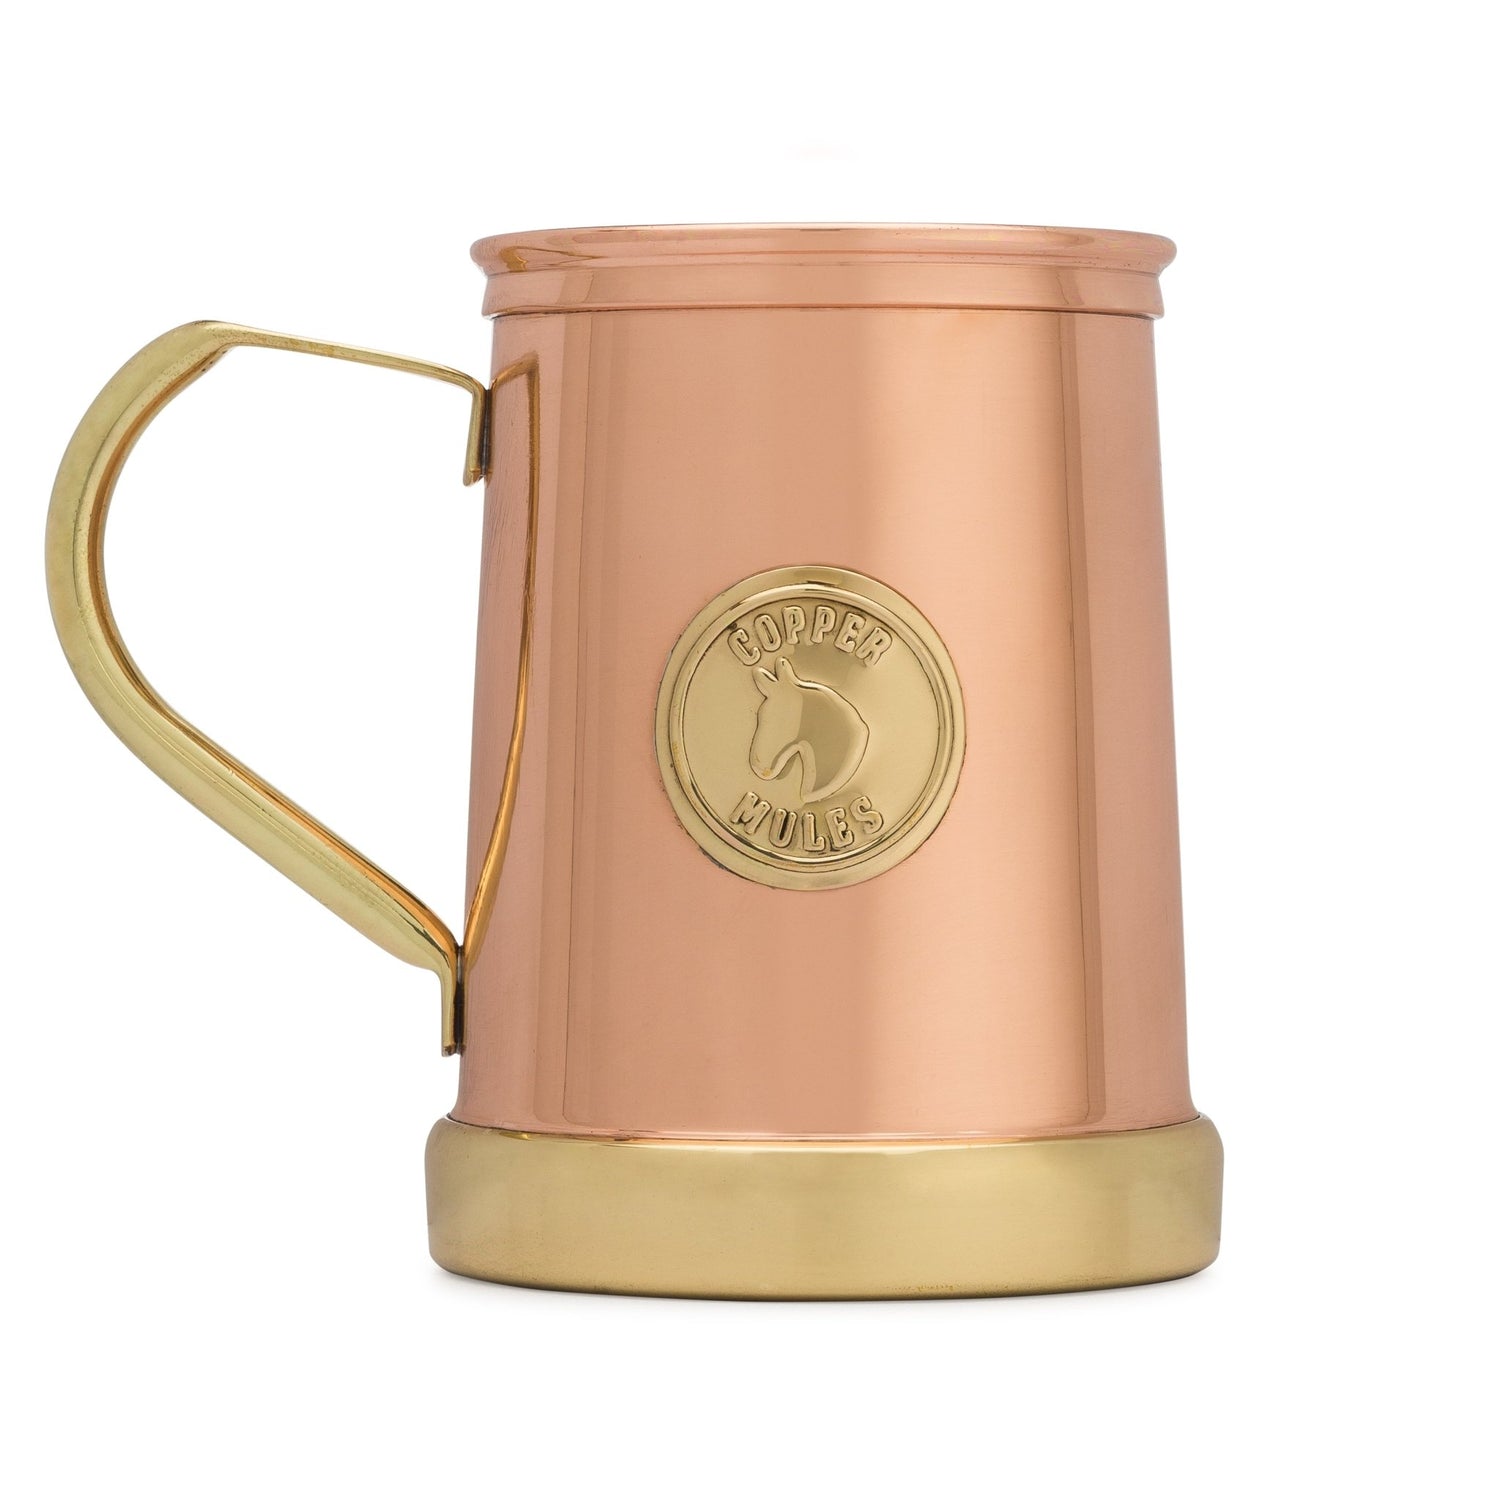 <H3>The Moscow Mule Copper Mug Upgrade